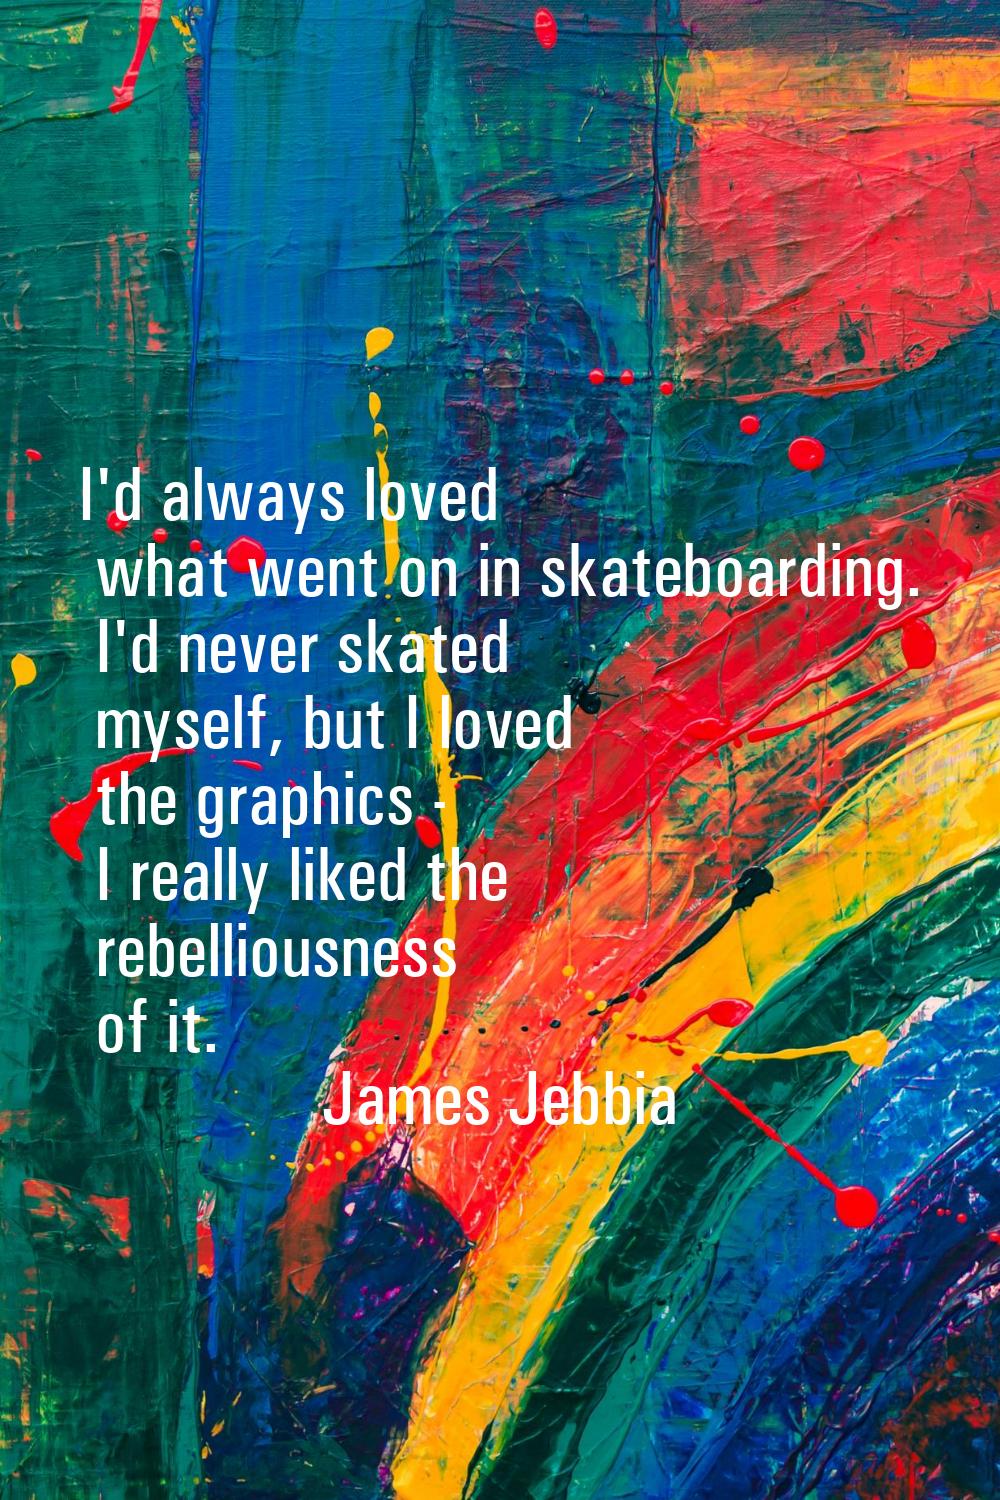 I'd always loved what went on in skateboarding. I'd never skated myself, but I loved the graphics -